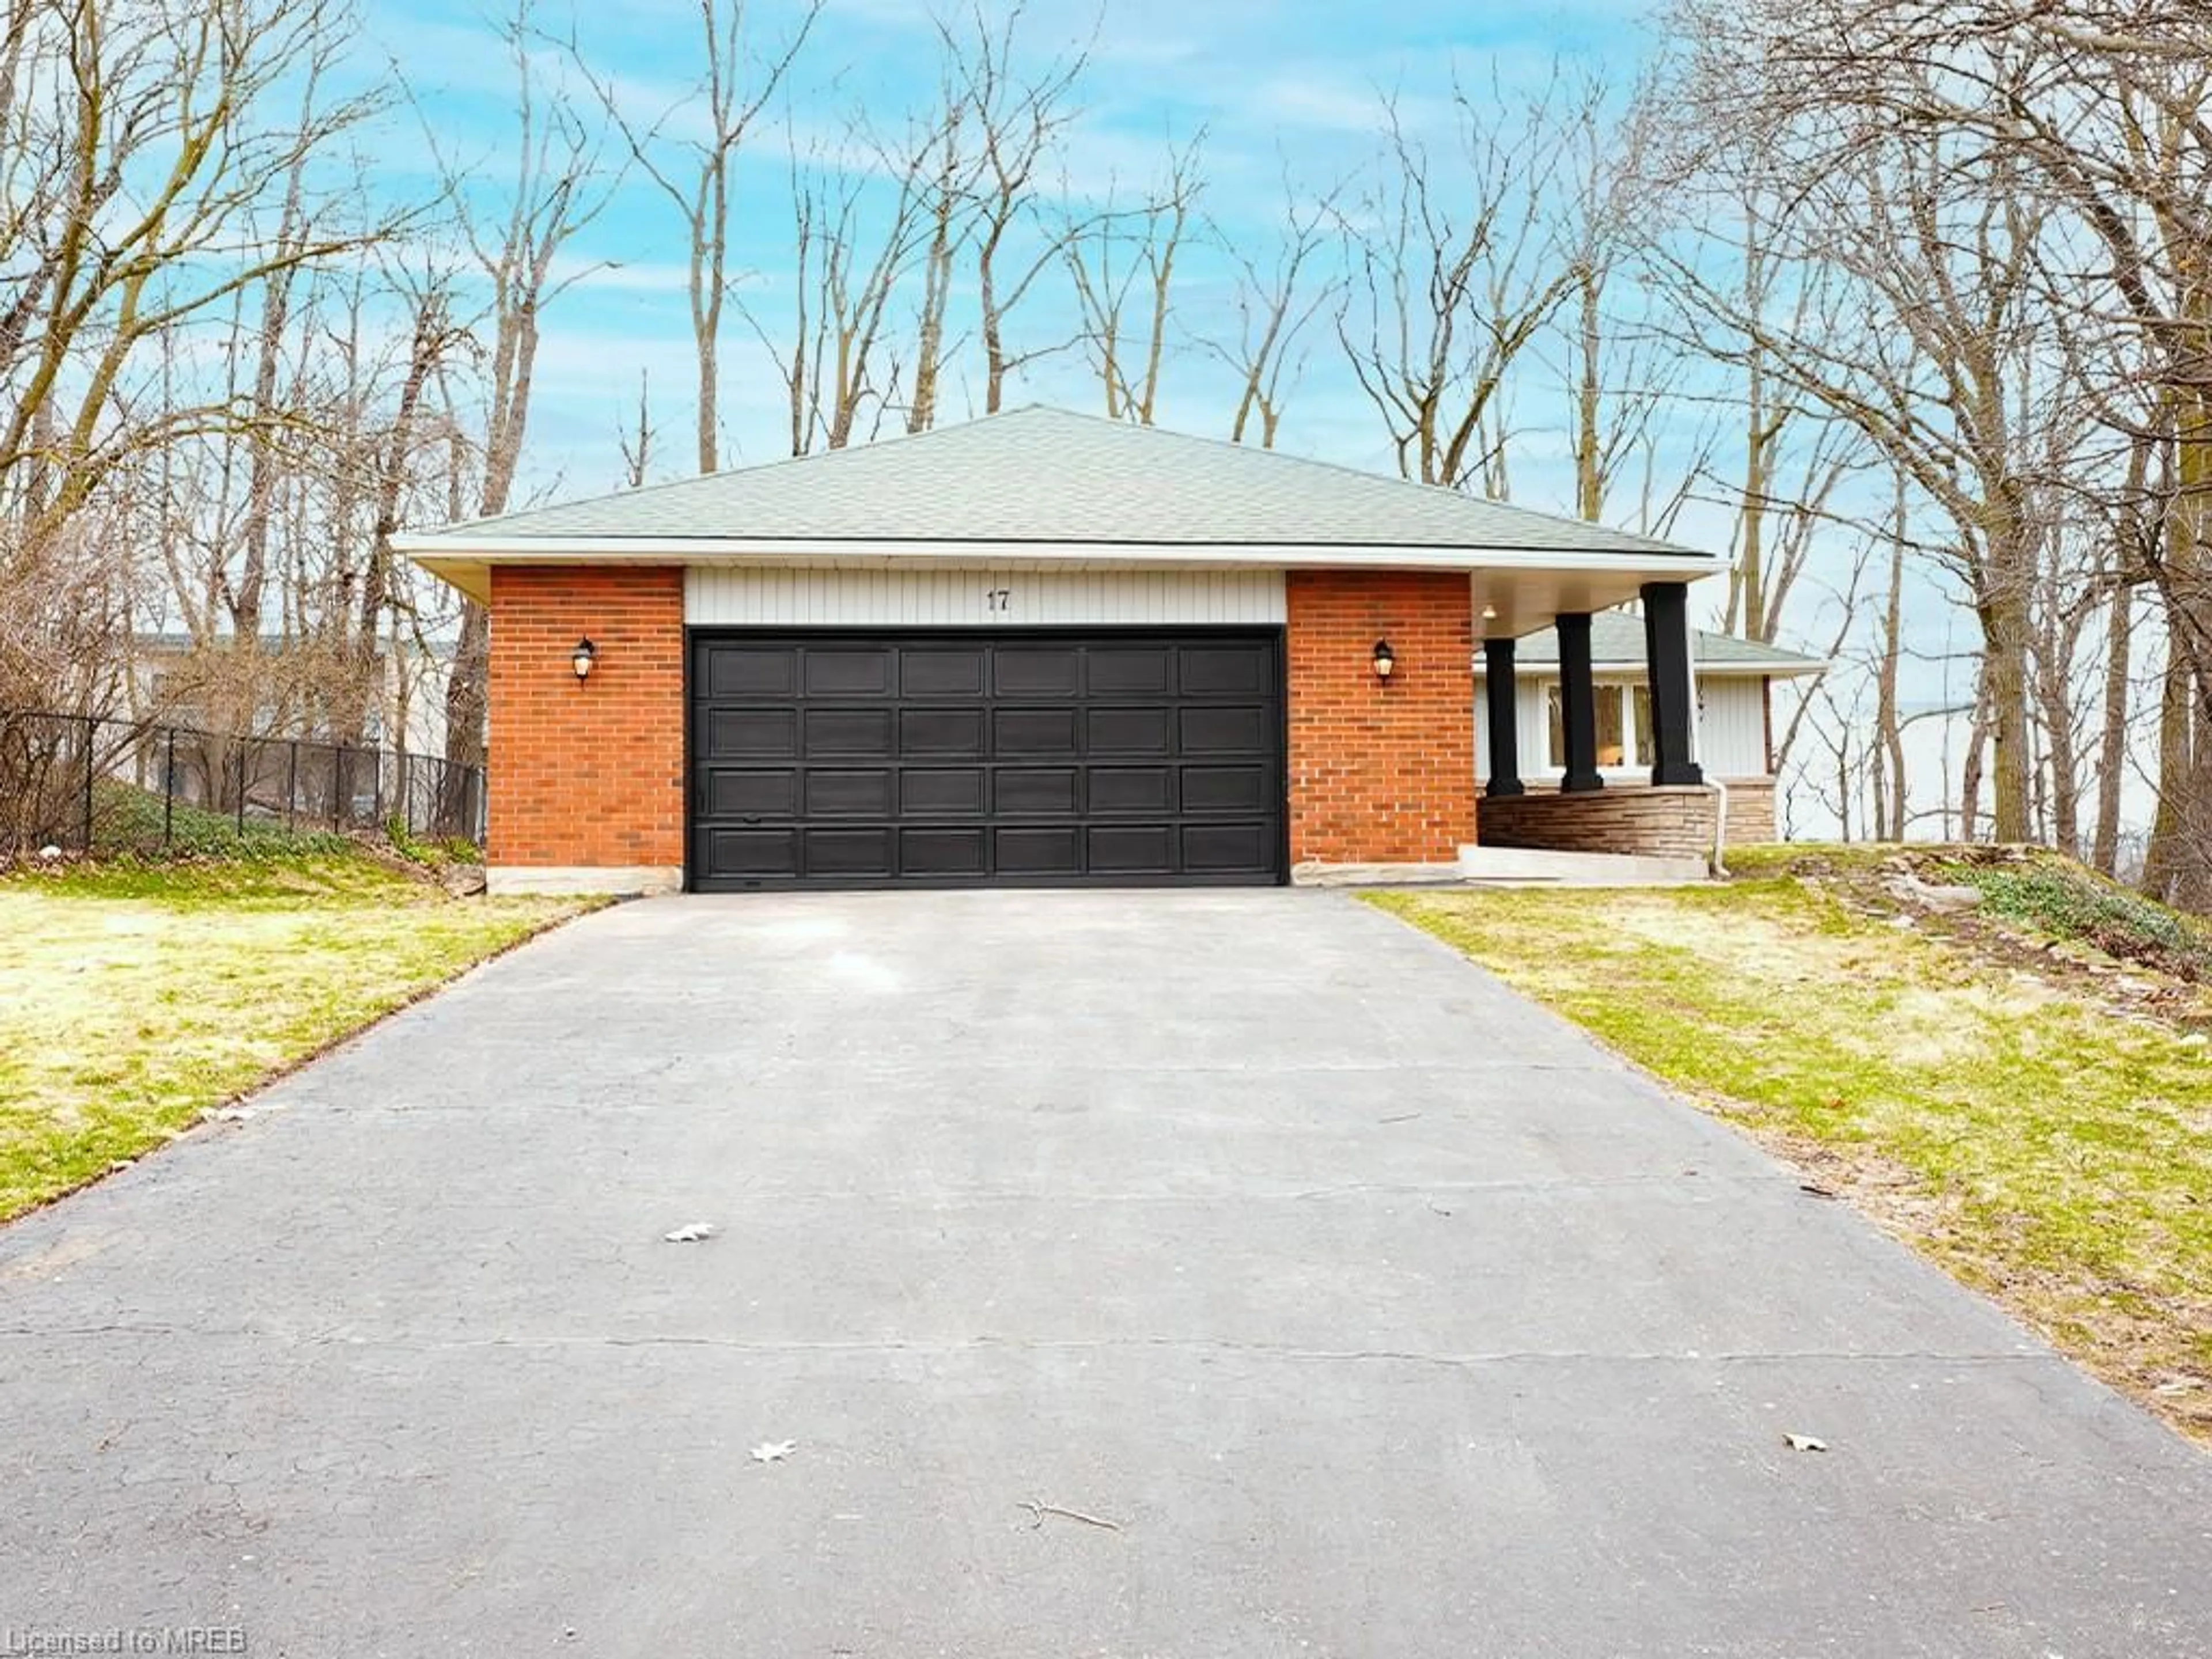 Home with brick exterior material for 17 Riverview Dr, Cambridge Ontario N1S 3N7